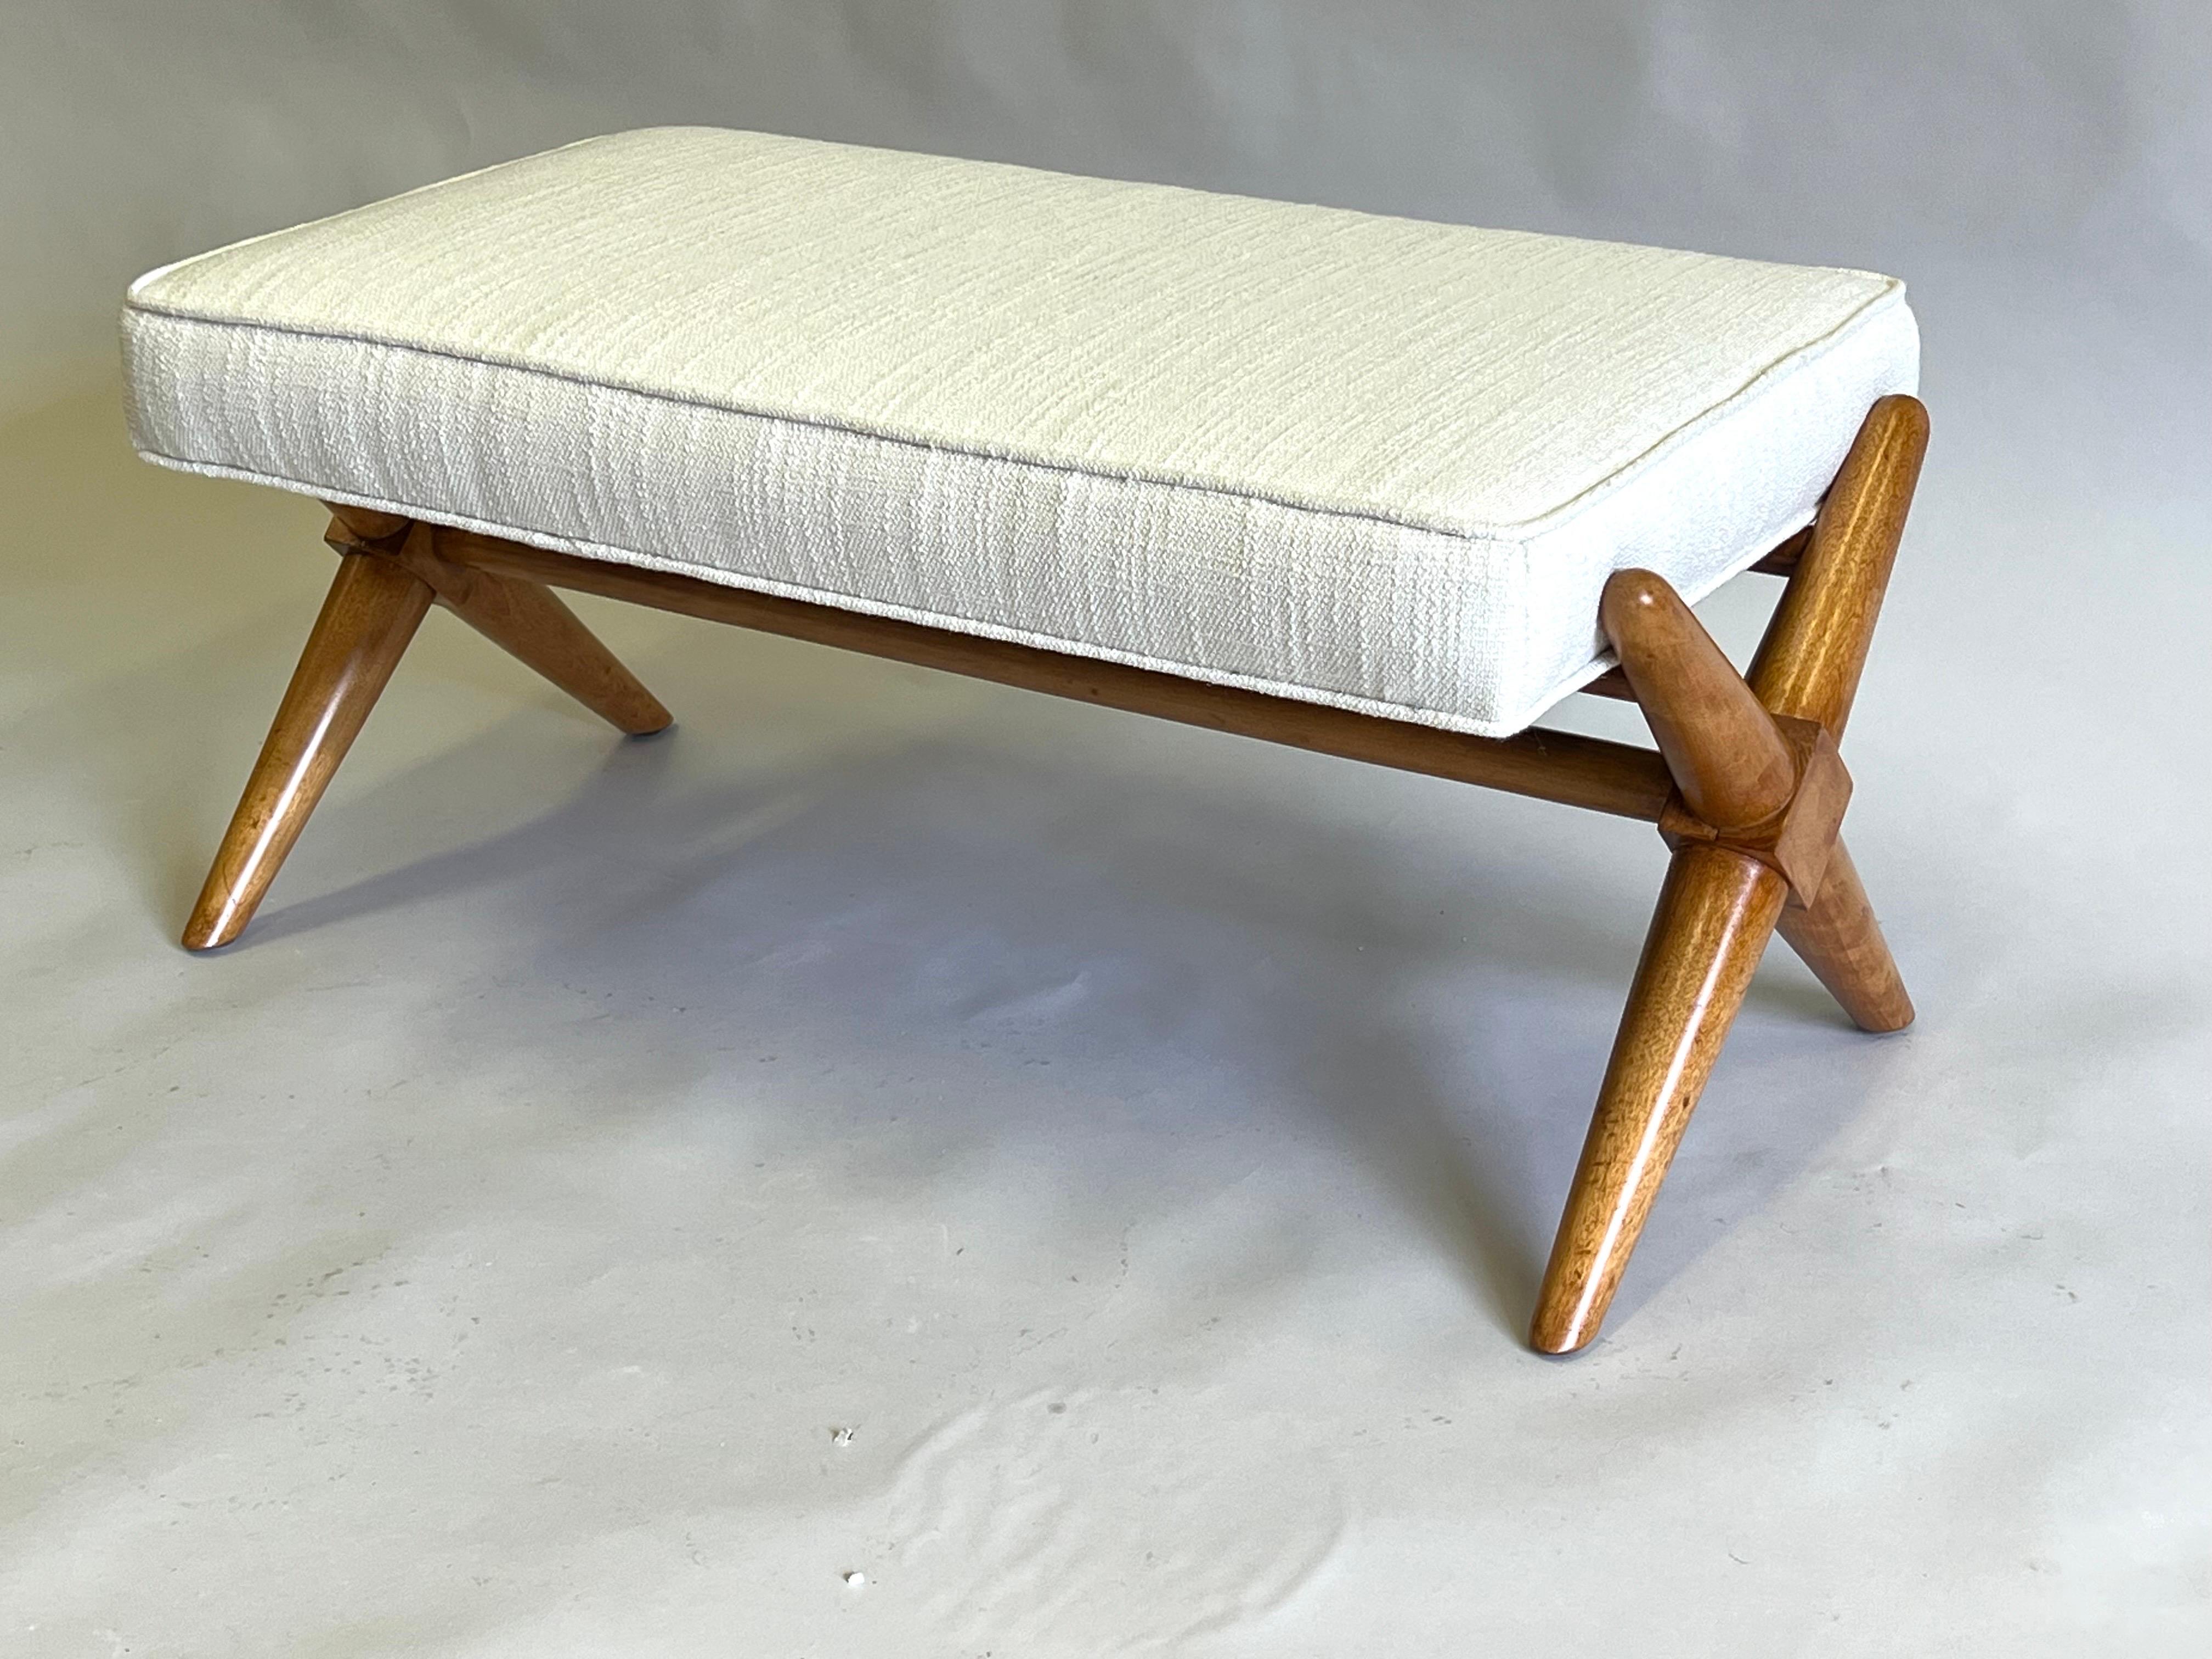 French Mid-Century Modern Neoclassical Hardwood Bench in the style of Jean-Michel Frank